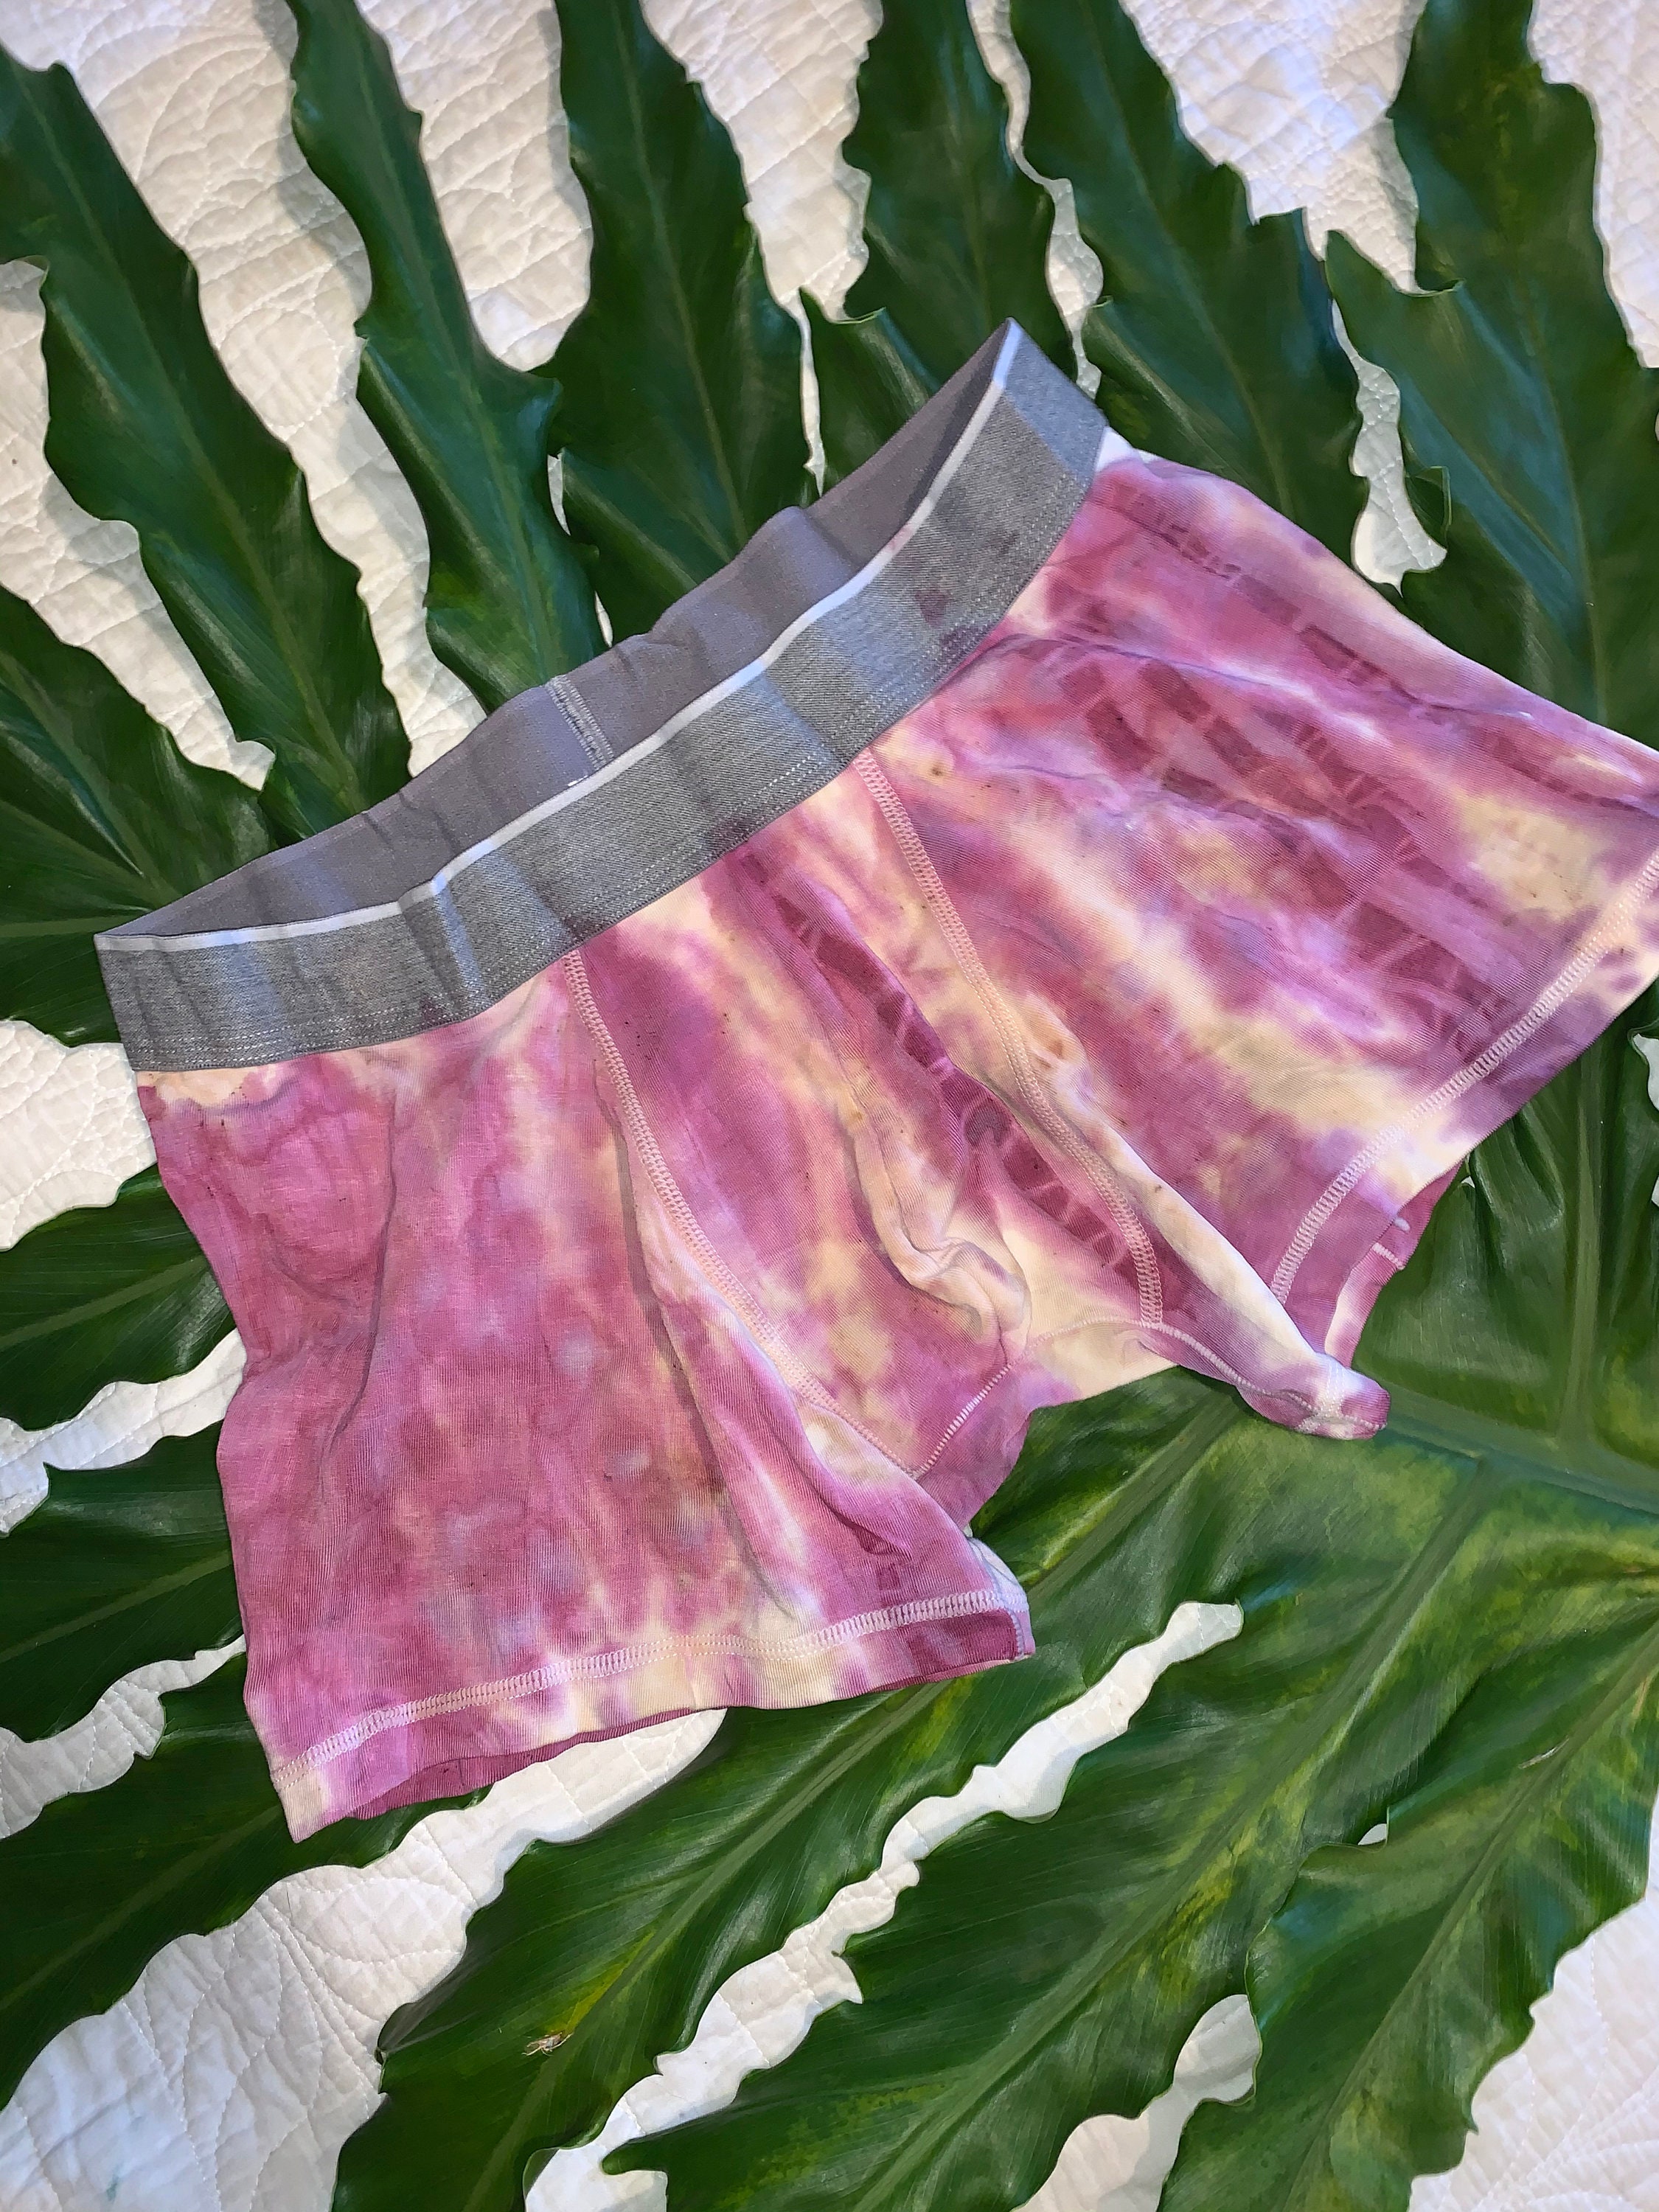 Magical Plant Dyed High-waist Panties Dyed With Avocado, Beet